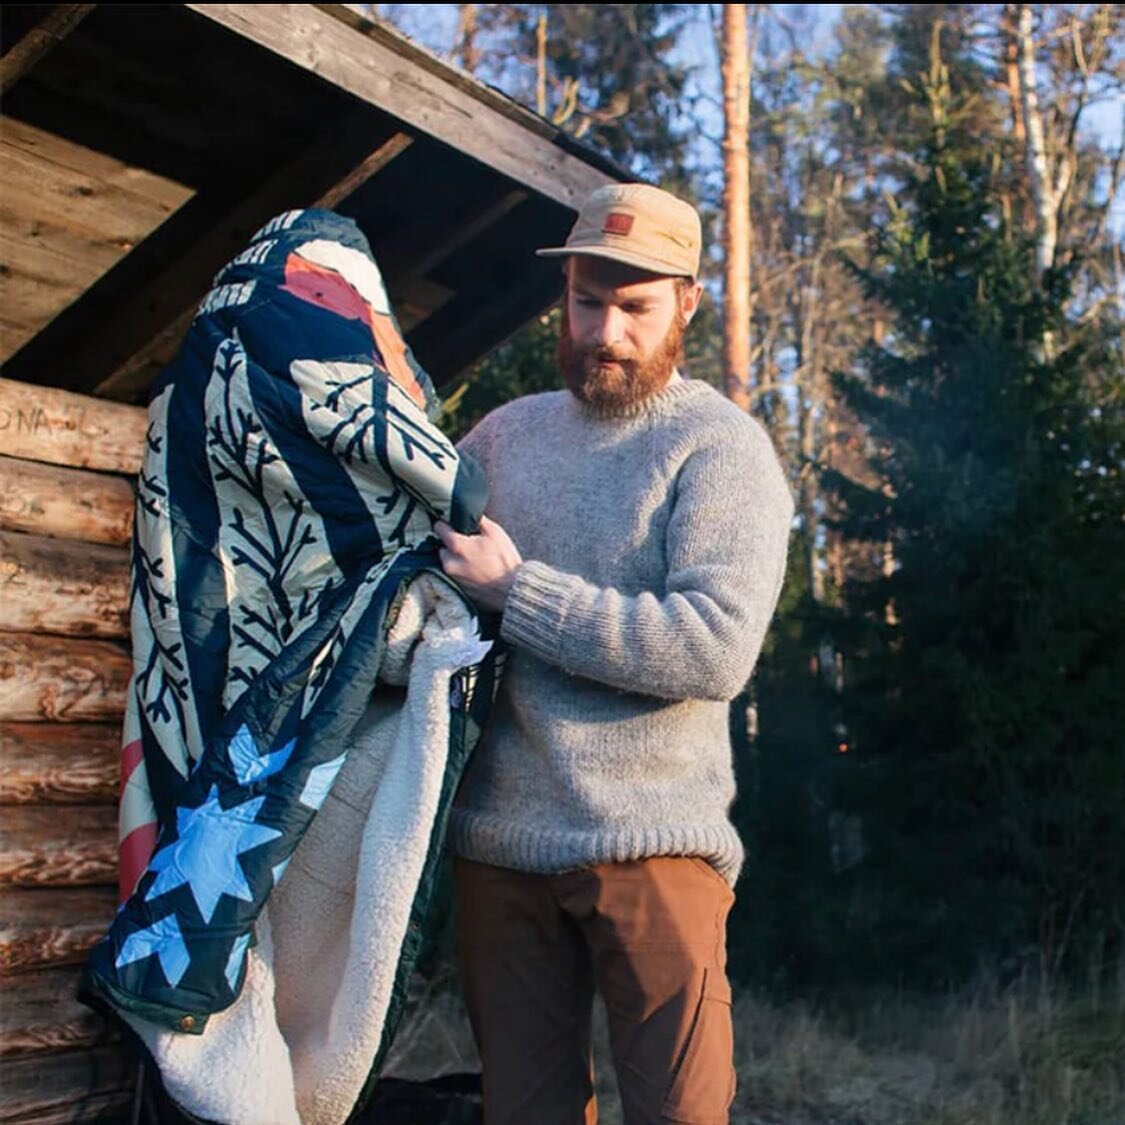 NEW WORK
.
If you&rsquo;re looking for a great Christmas gift for the winter months. Inspired by Nordic patterns and traditional quilts, my fleece lined blankets designed for @voited are up
.
Go get one at the link in bio
.

#outdoors #nature #advent